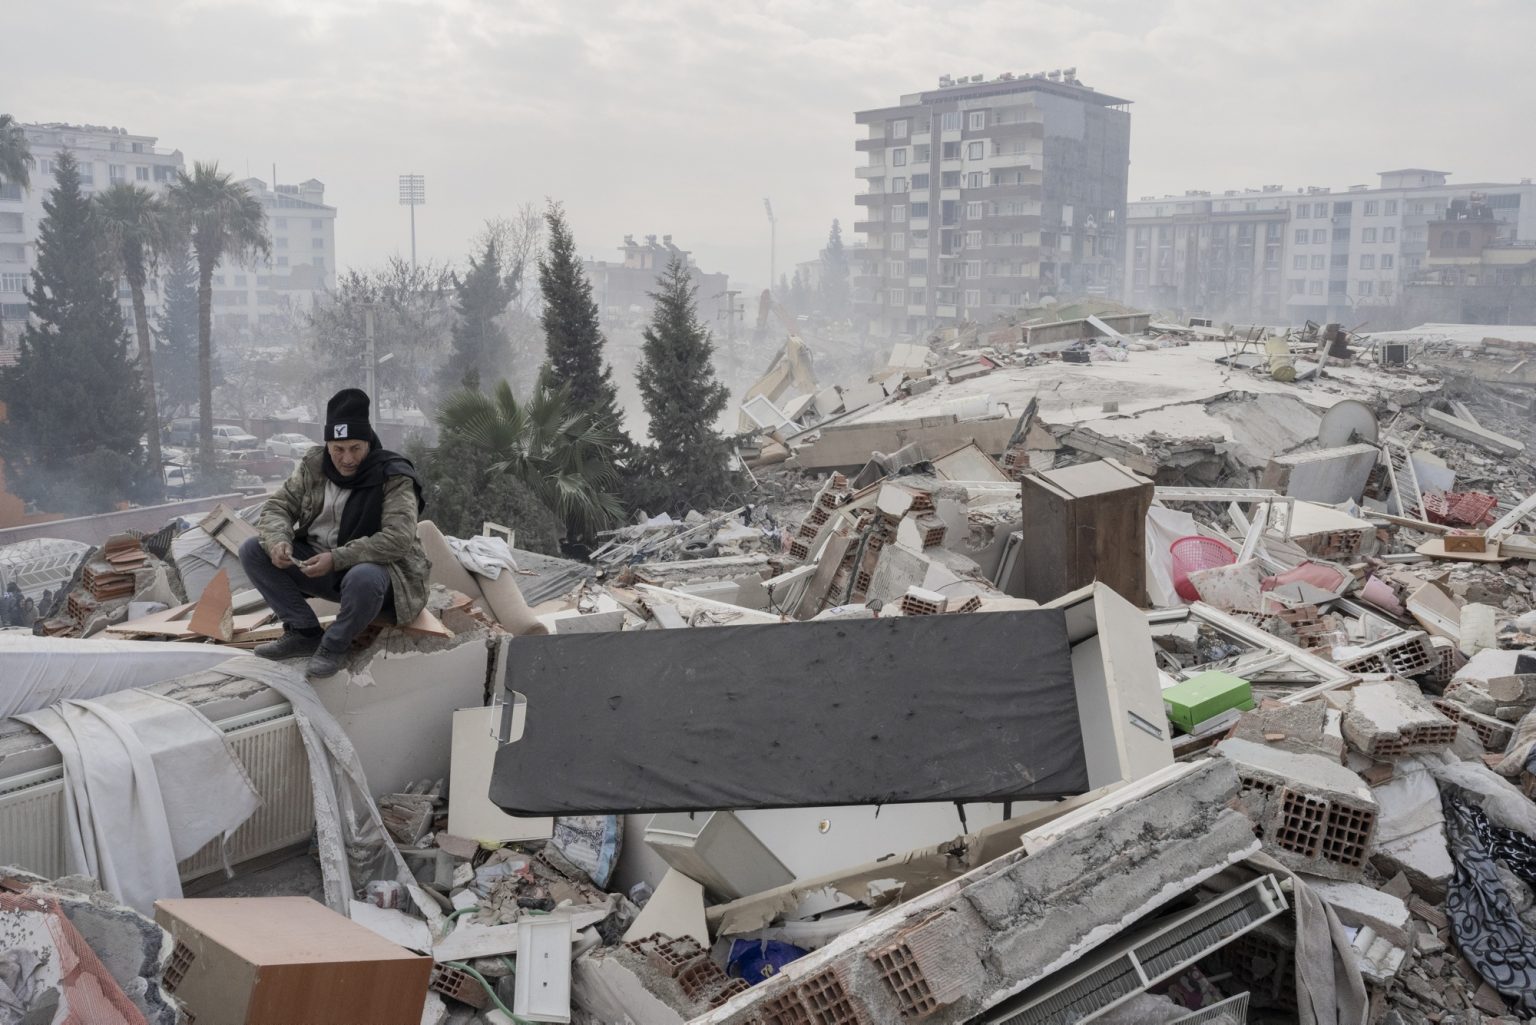 Kahramanmaras¸, Turkey, February 2023 - The aftermath of the earthquake that hit southern Turkey and northern Syria.    A man sits on top of the rubble of a collapsed building. ><
Kahramanmaras¸, Turchia, febbraio 2023  Le conseguenze del terremoto che ha colpito la Turchia del Sud e la Siria del nord.